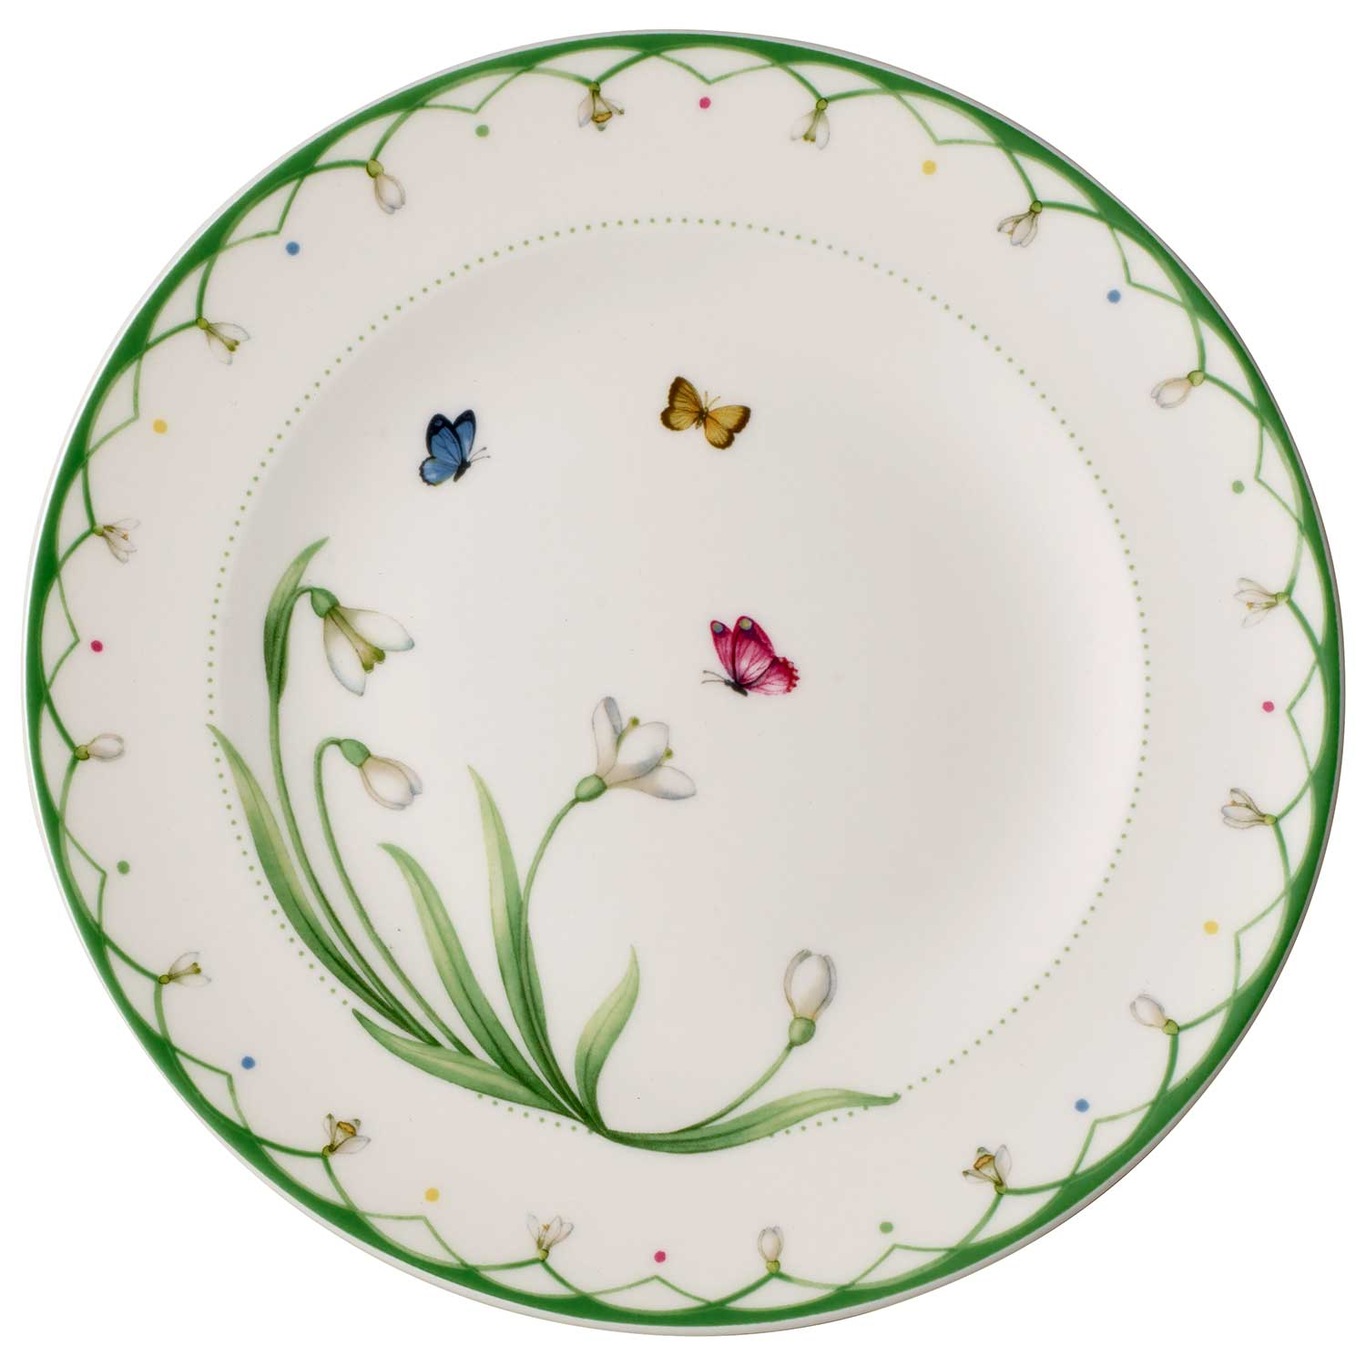 Colourful Spring Breakfast Plate, 22 cm